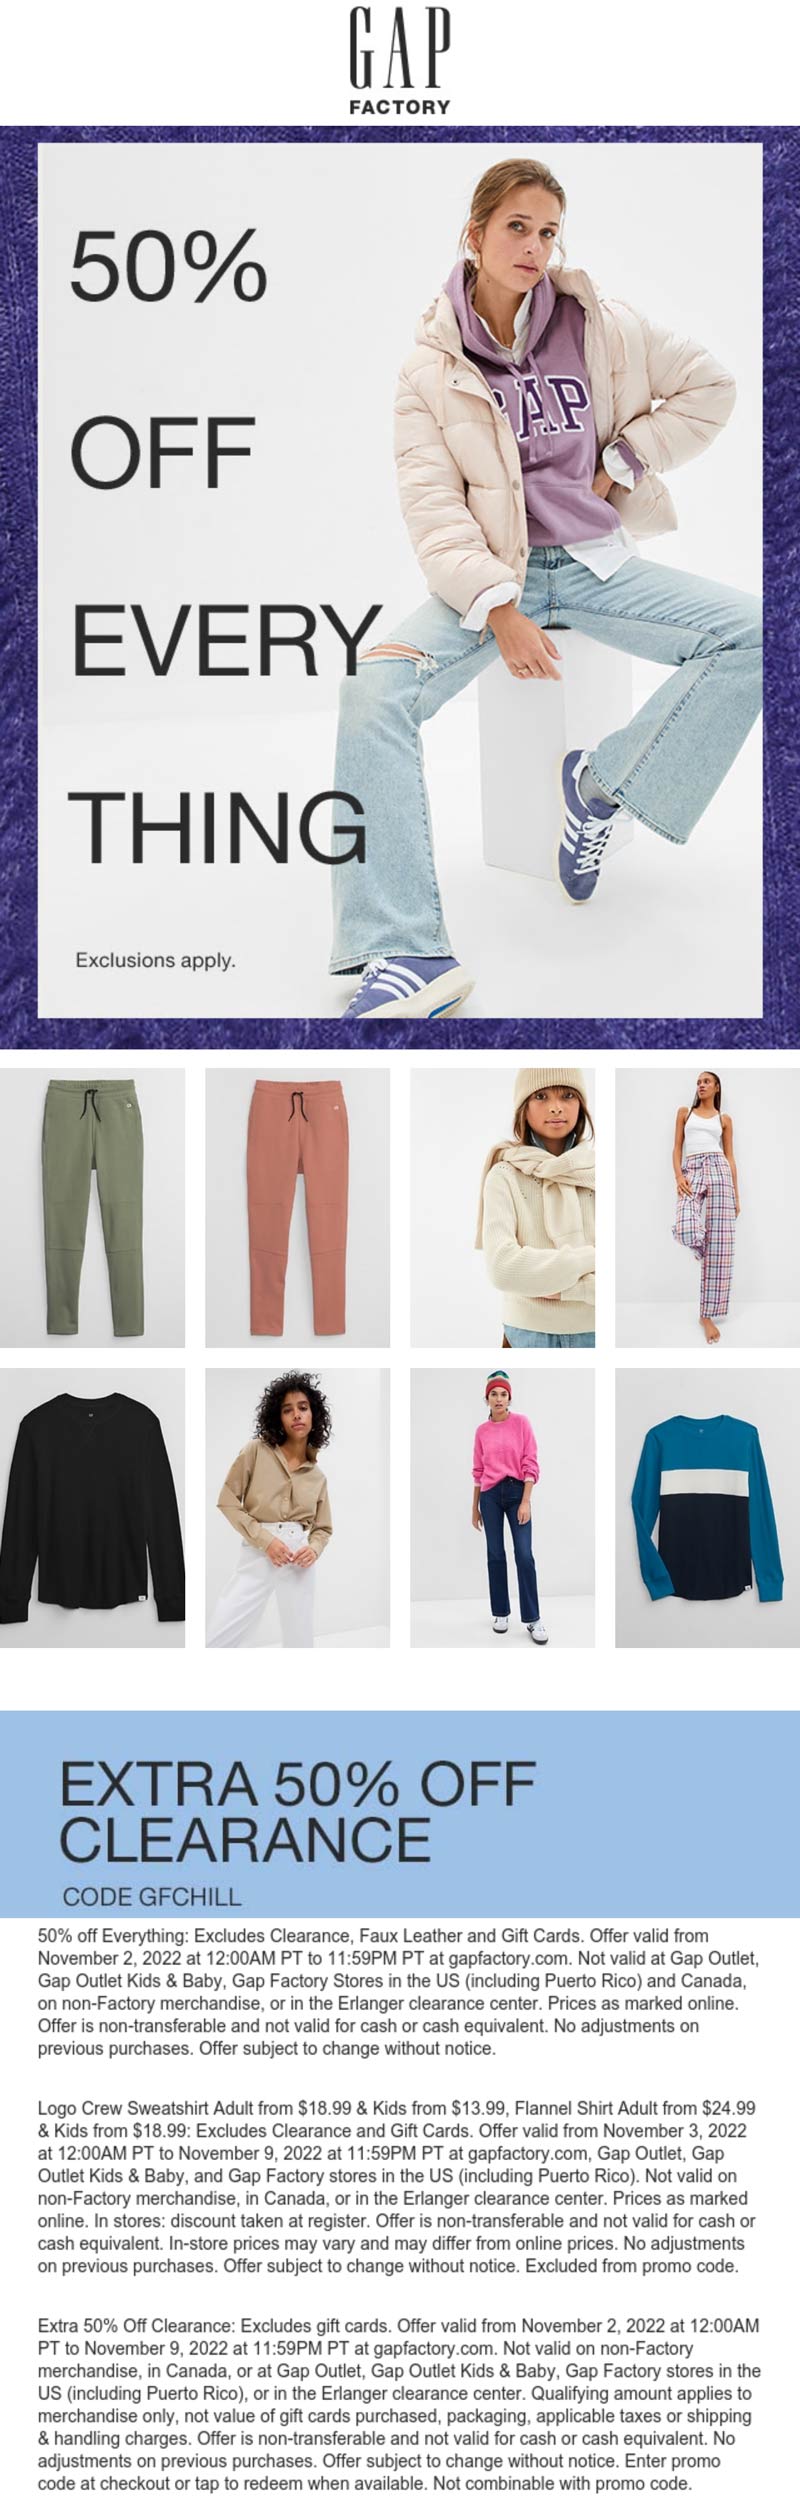 Gap Factory stores Coupon  50% off everything today at Gap Factory #gapfactory 